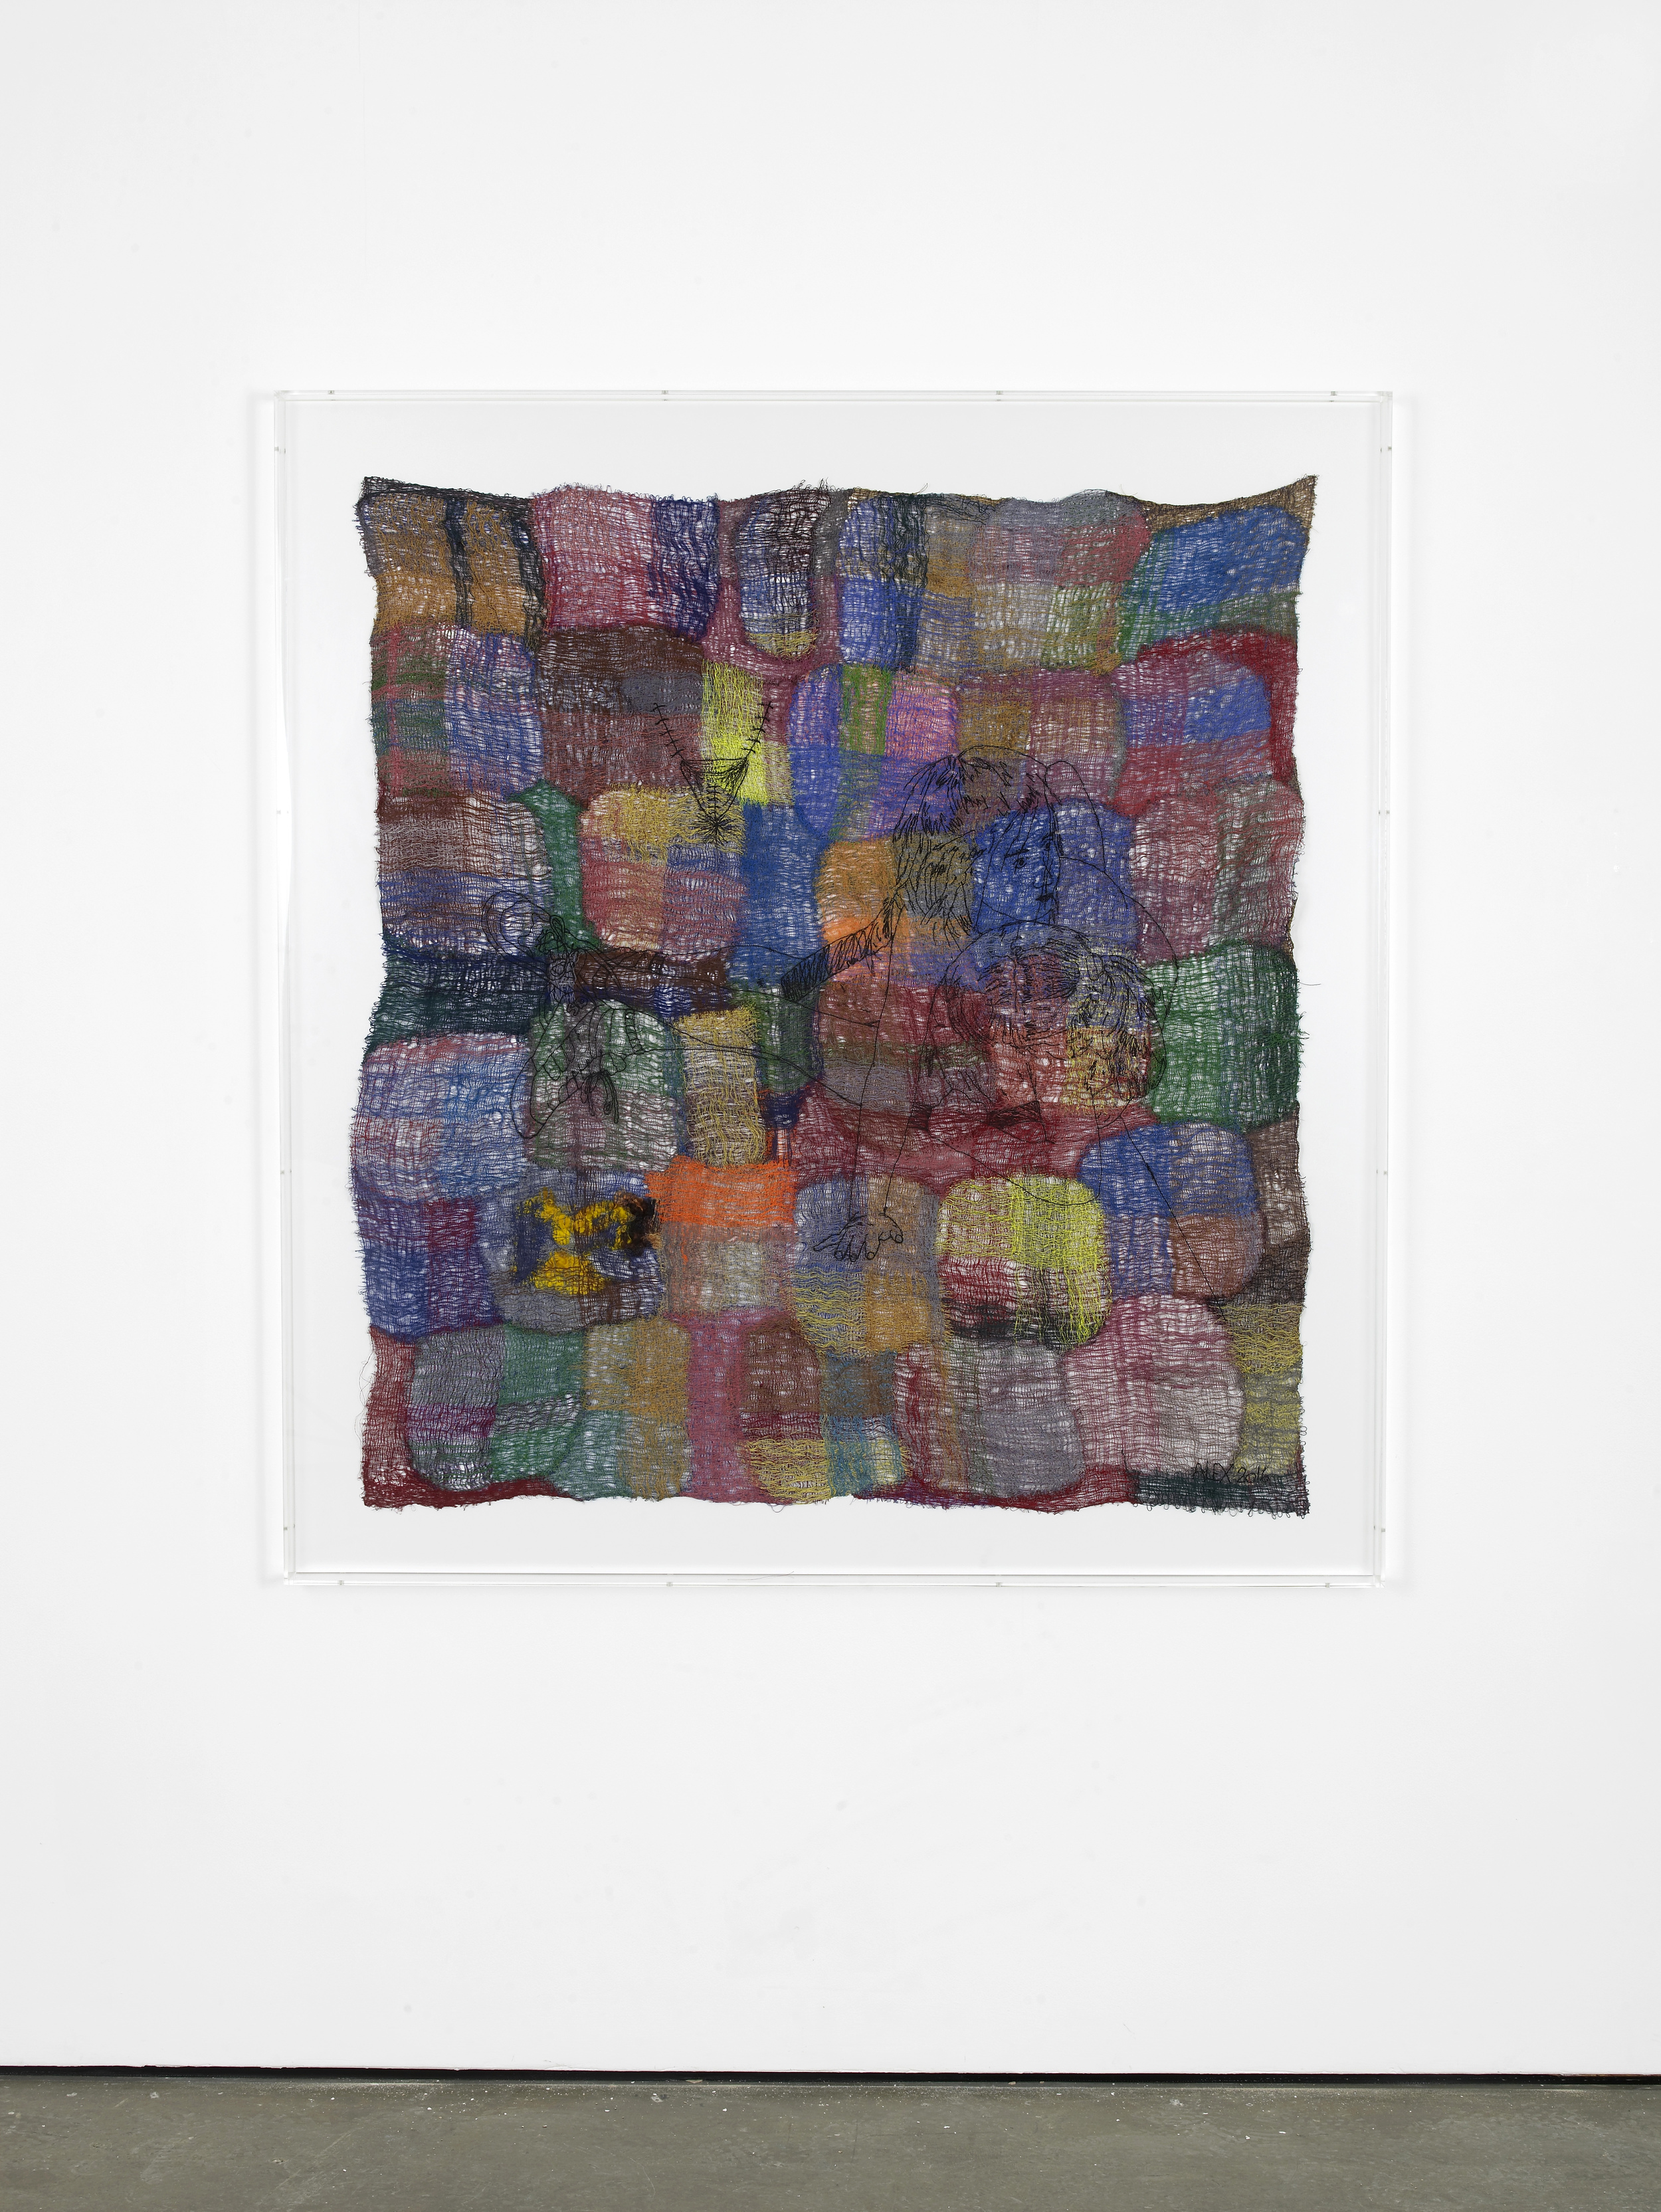     Rupture 2016 Polyester, wool, viscose 140 x 128 cm / 55.1 x 50.3 in 158.2 x 146.2 x 7 cm / 62.2 x 57.5 x 2.7 in (framed) 